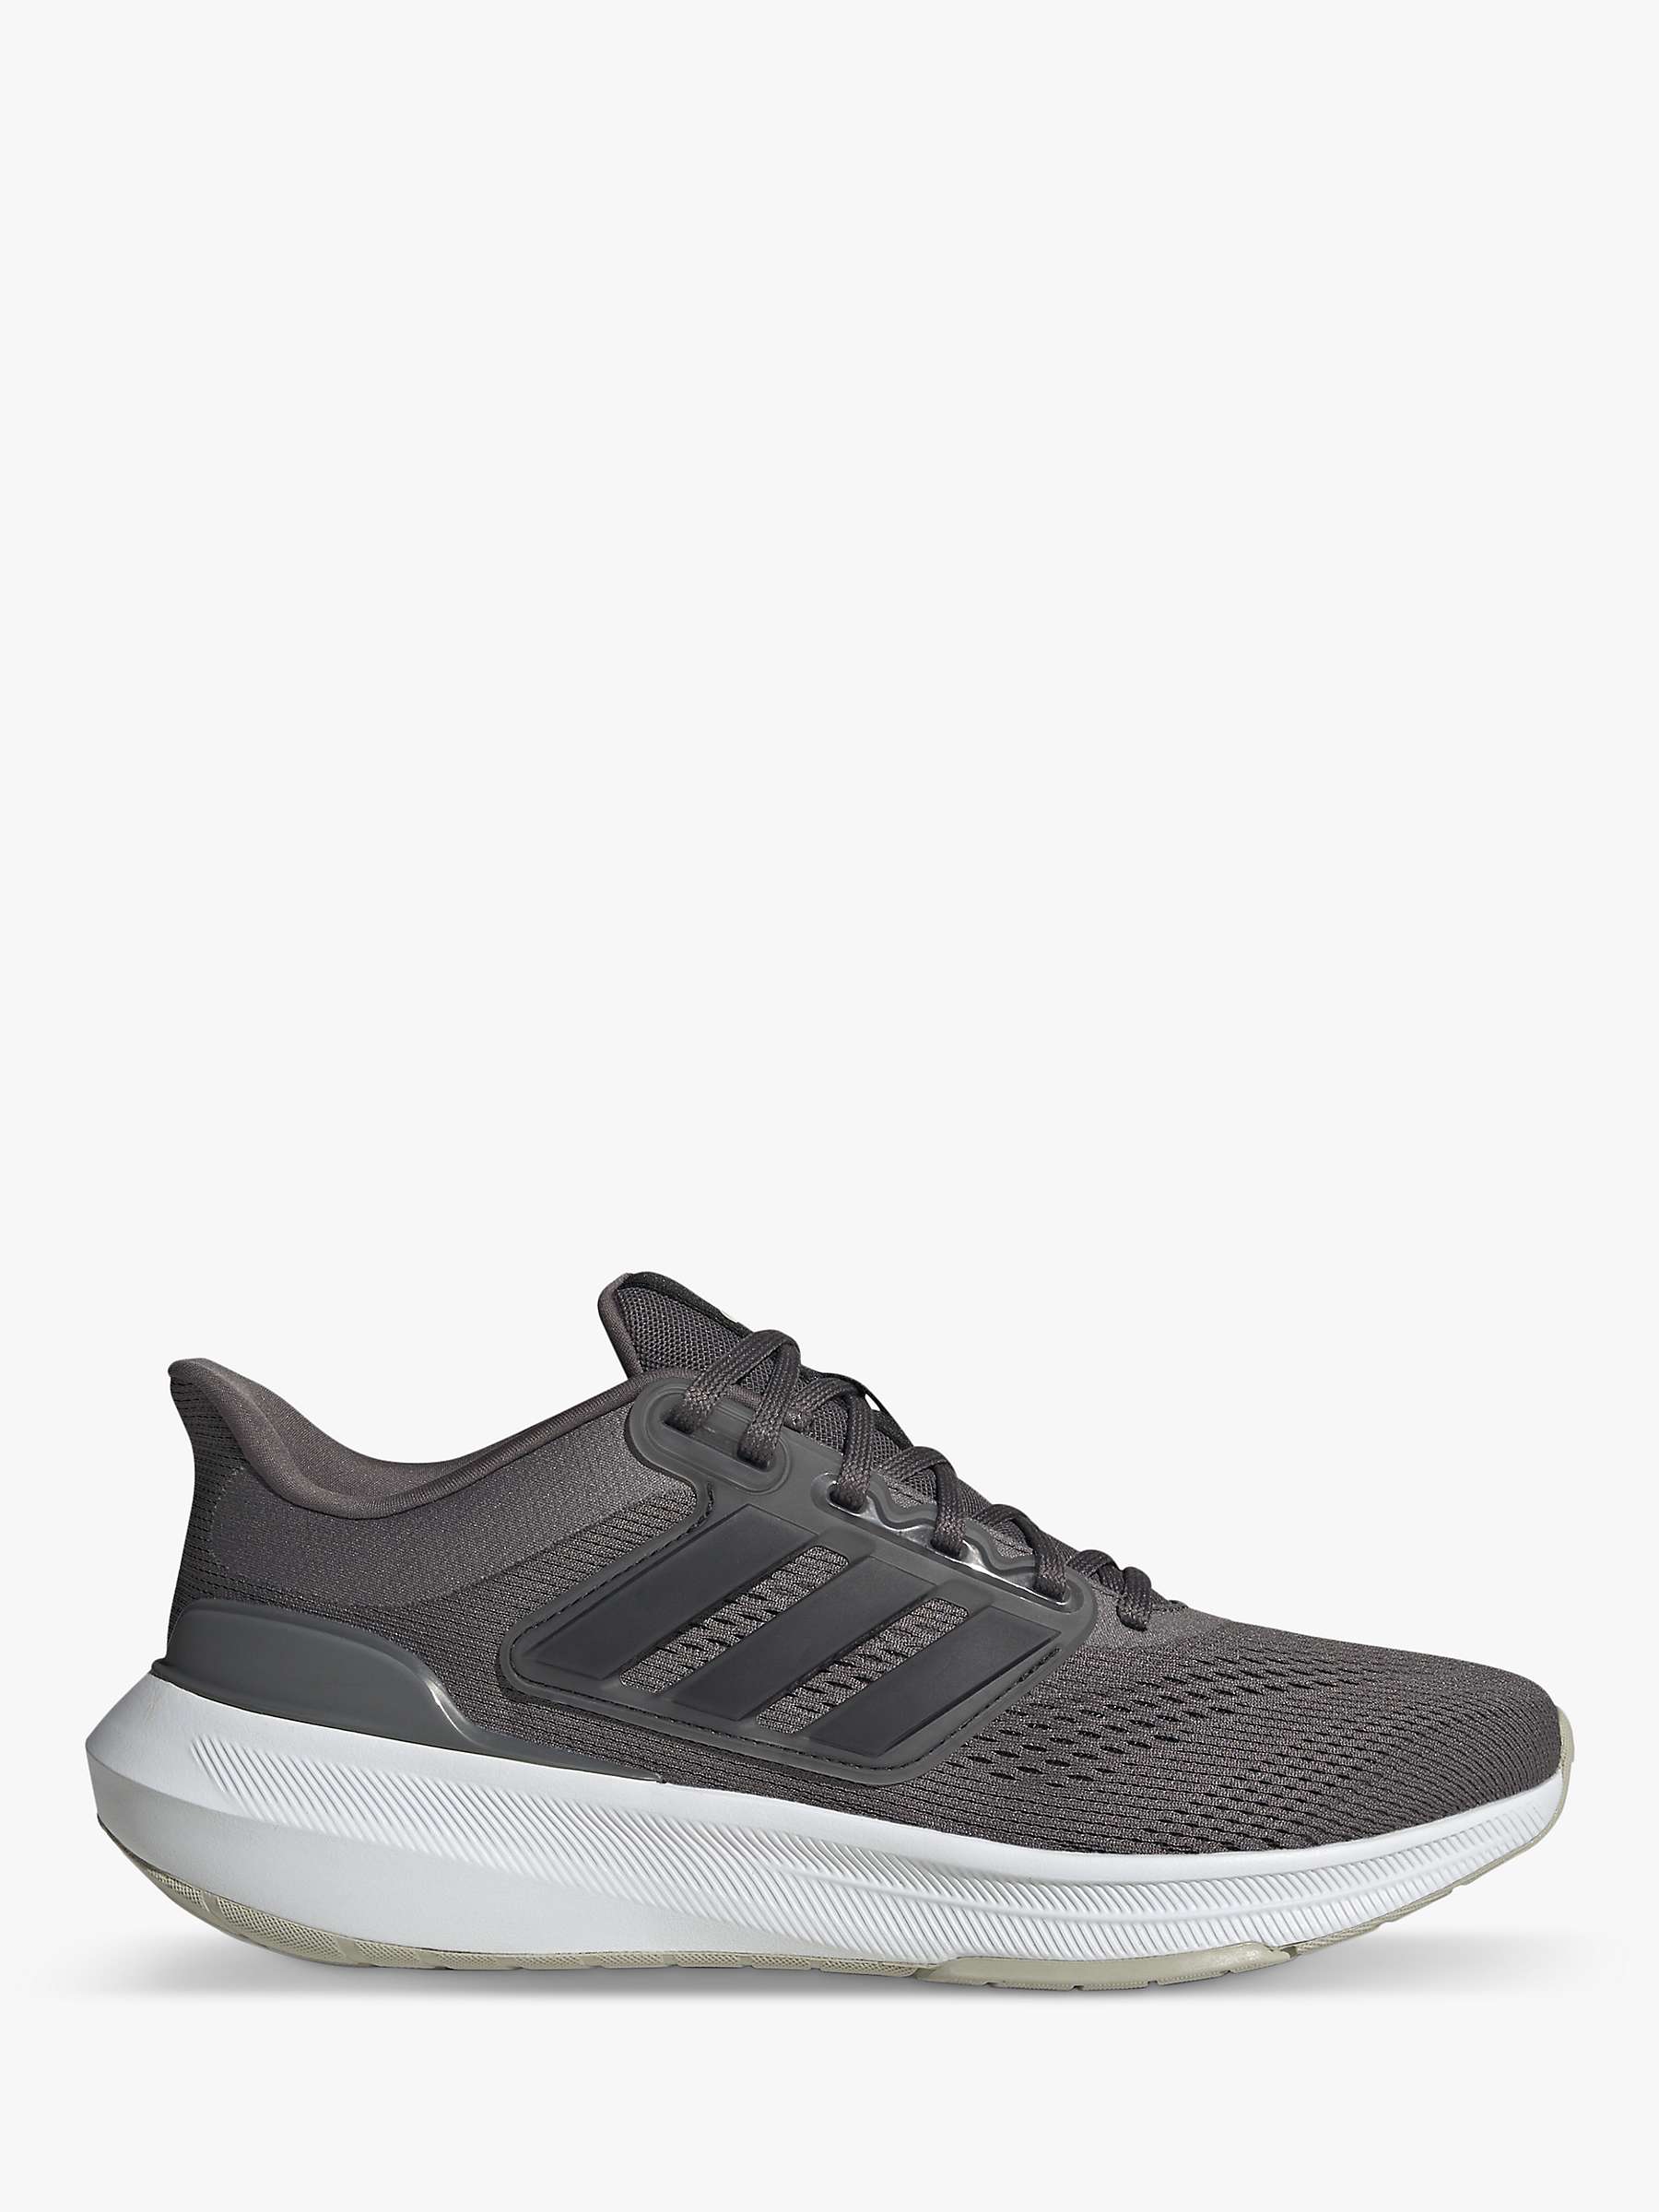 Buy adidas Ultrabounce Men's Running Shoes Online at johnlewis.com